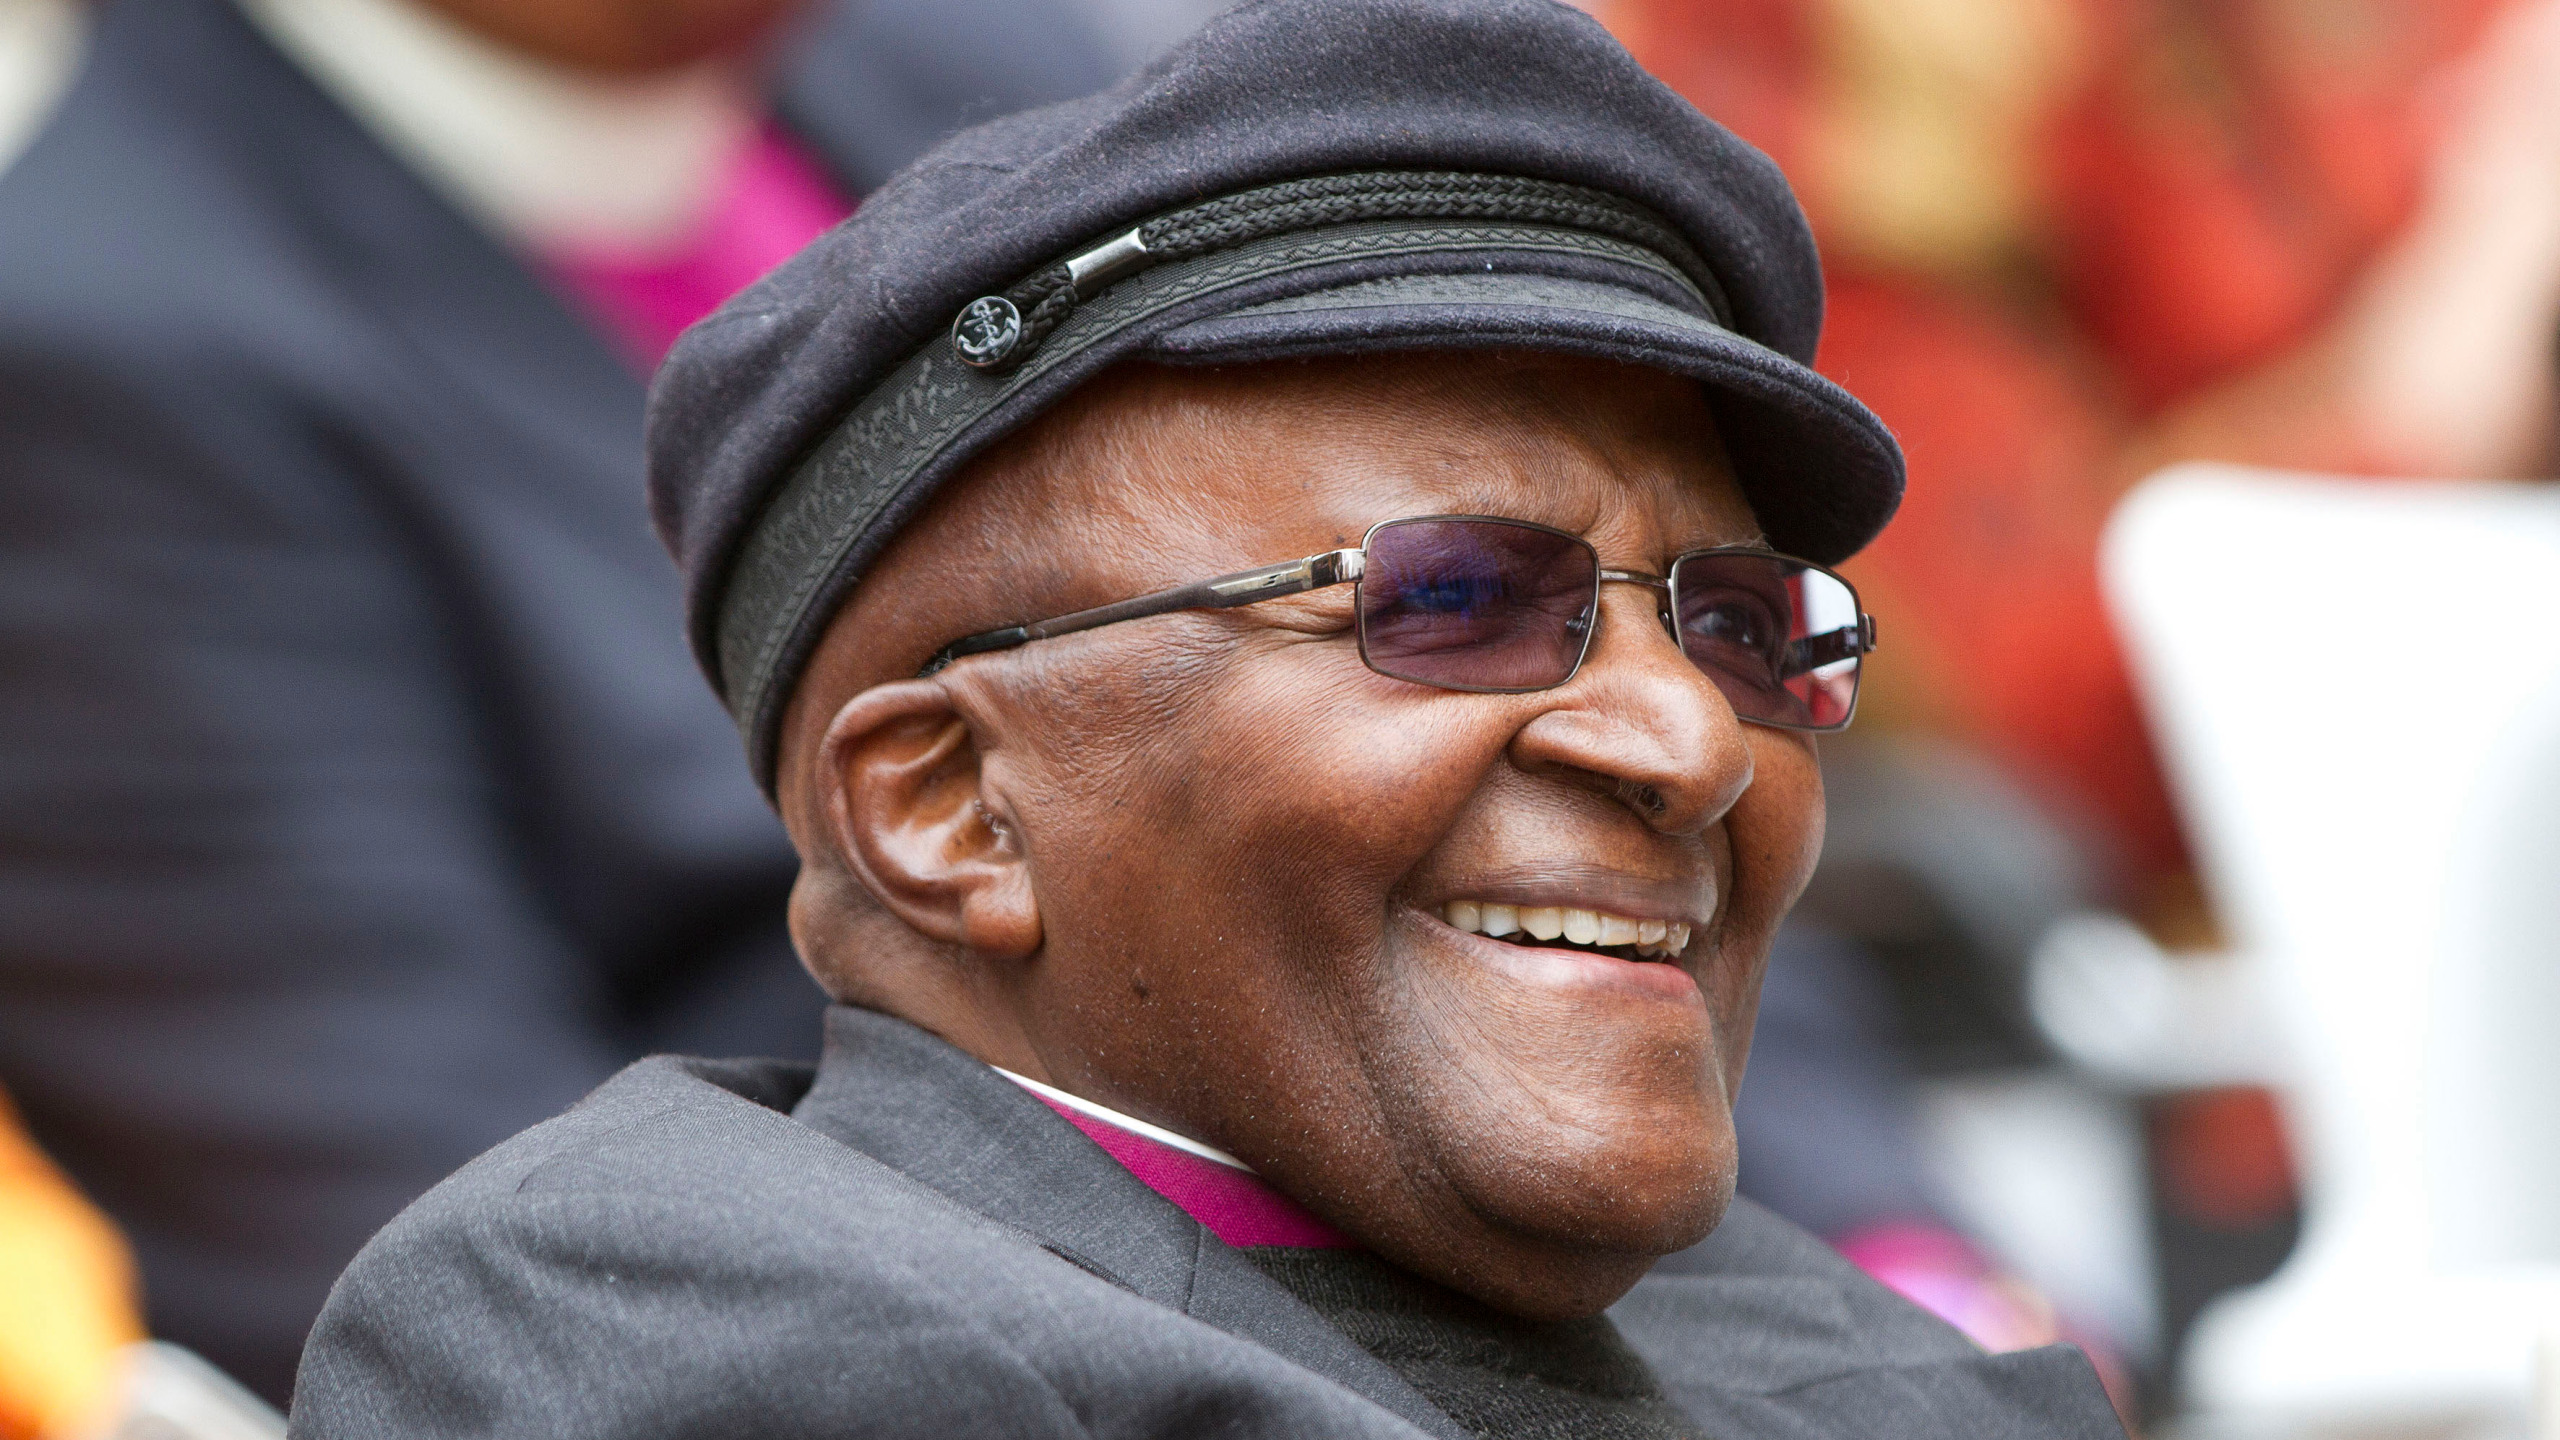 South African Ex Archbishop Tutu Hospitalized For Infection